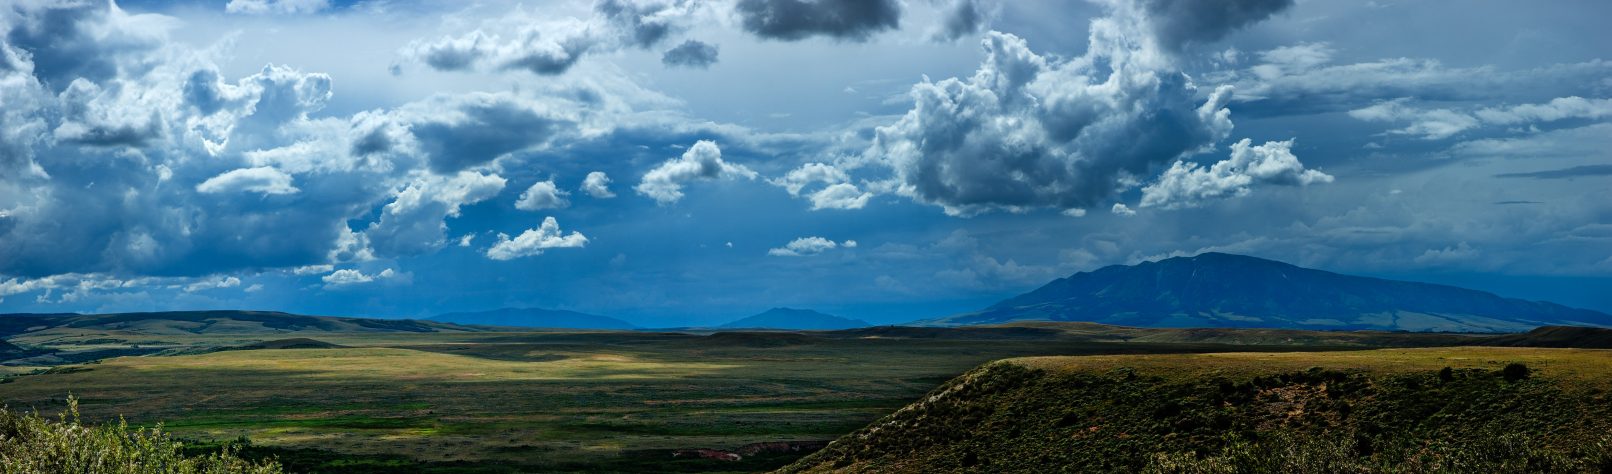 Plains of Wyoming with puffy clouds and distant mountains